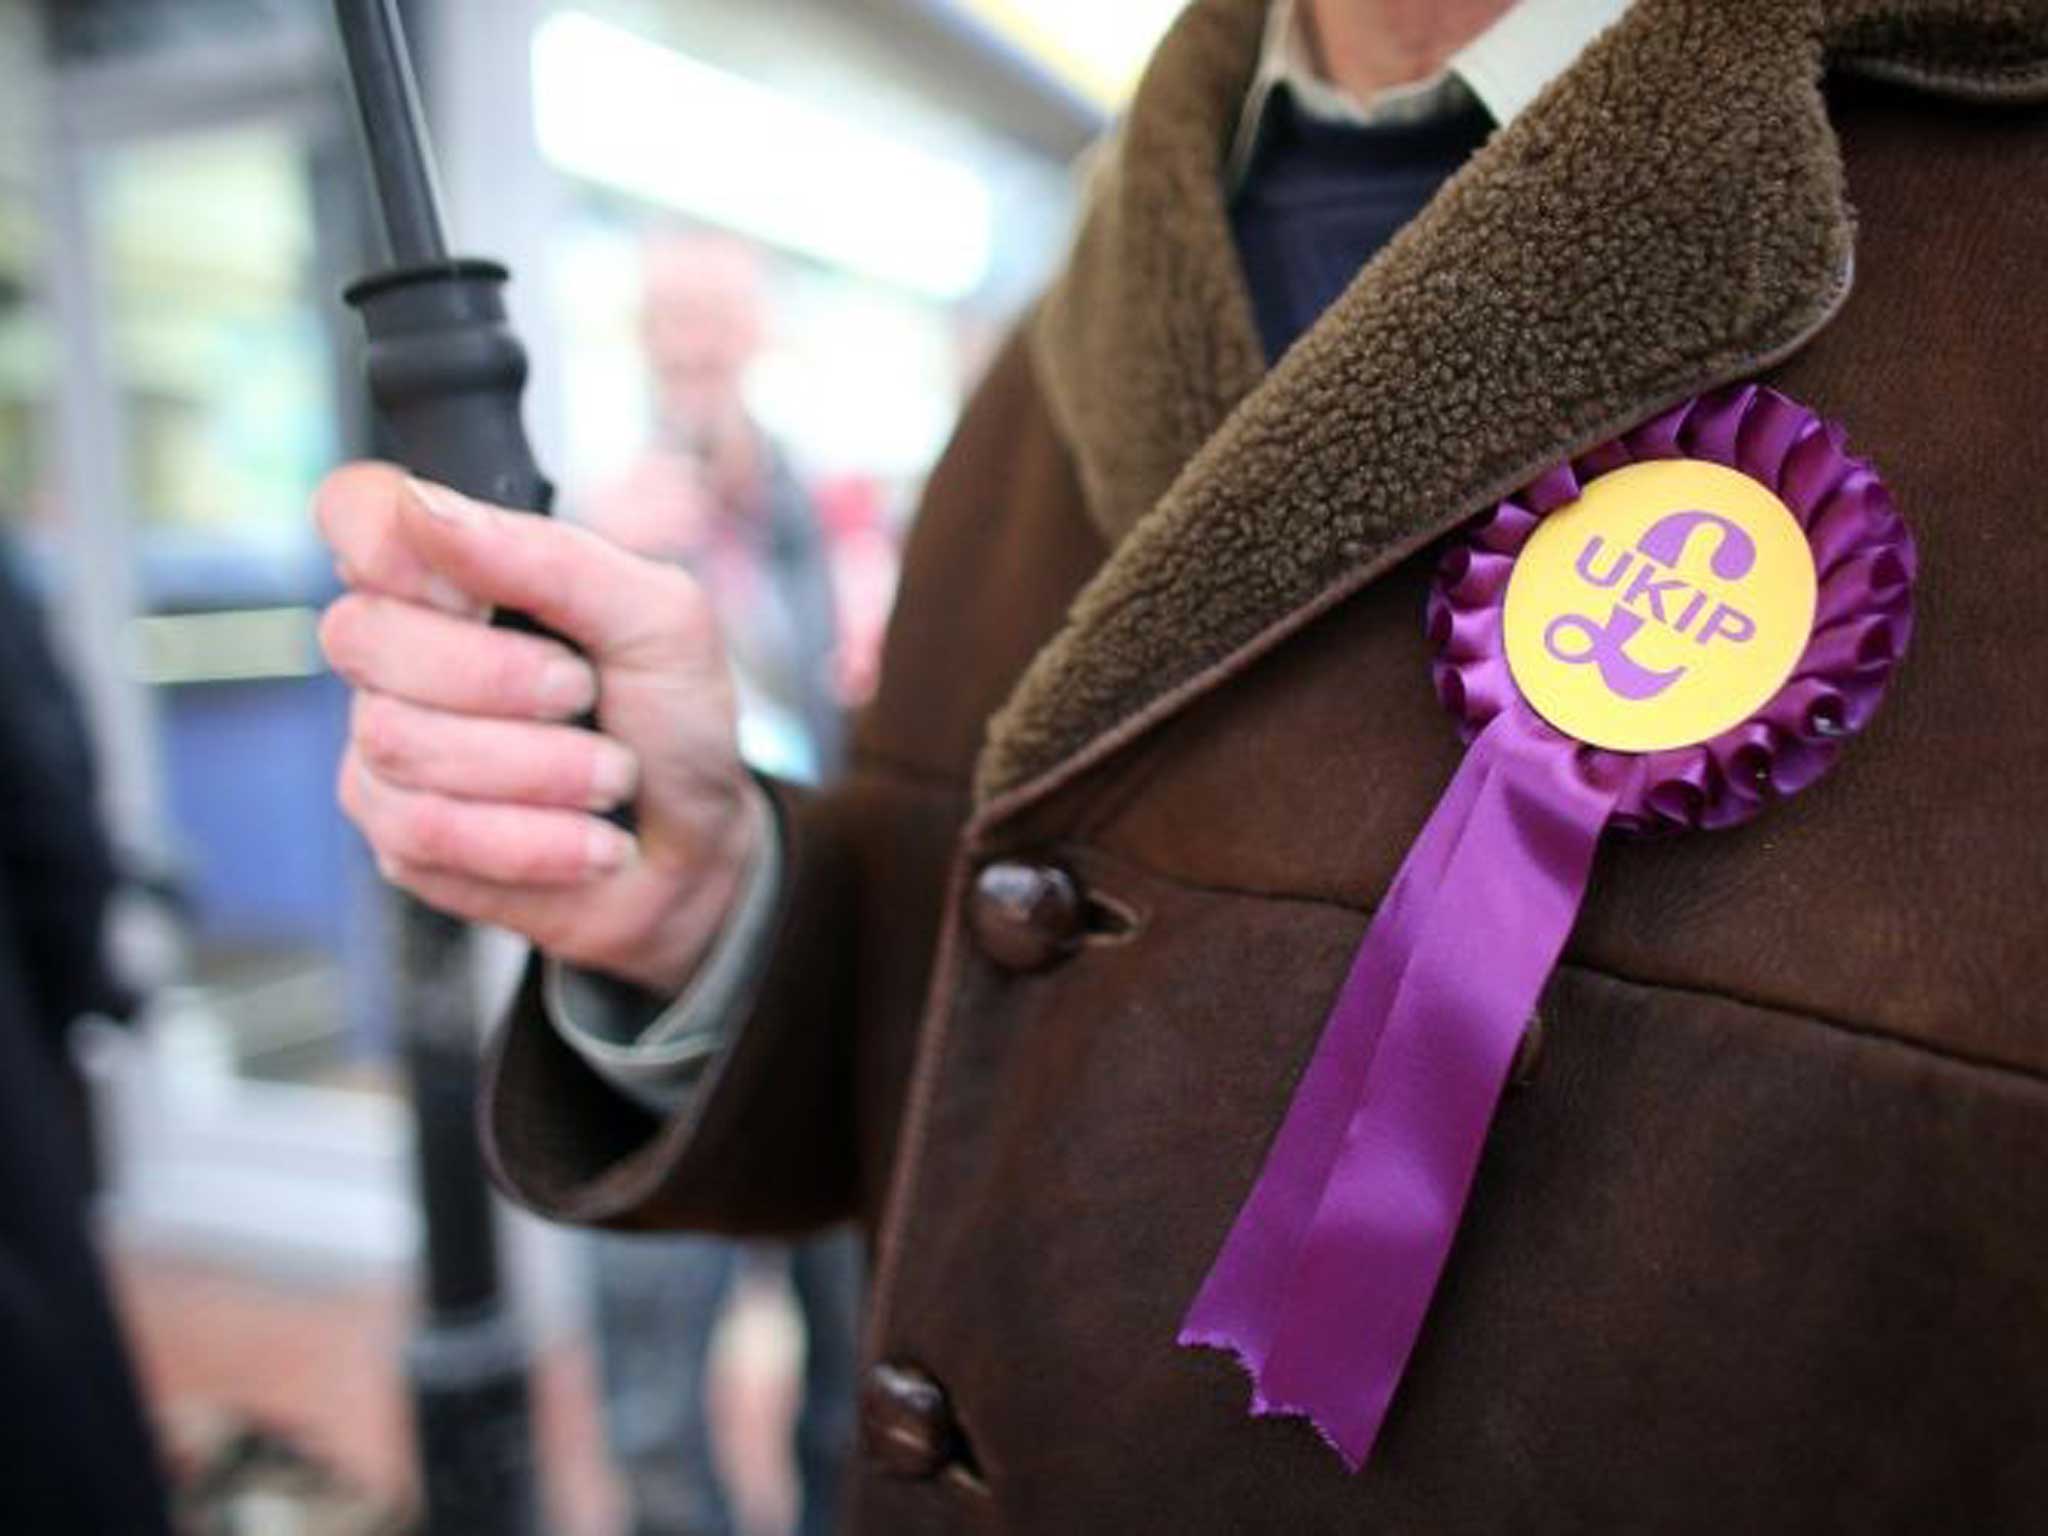 A UKIP member wearing the party's rosette